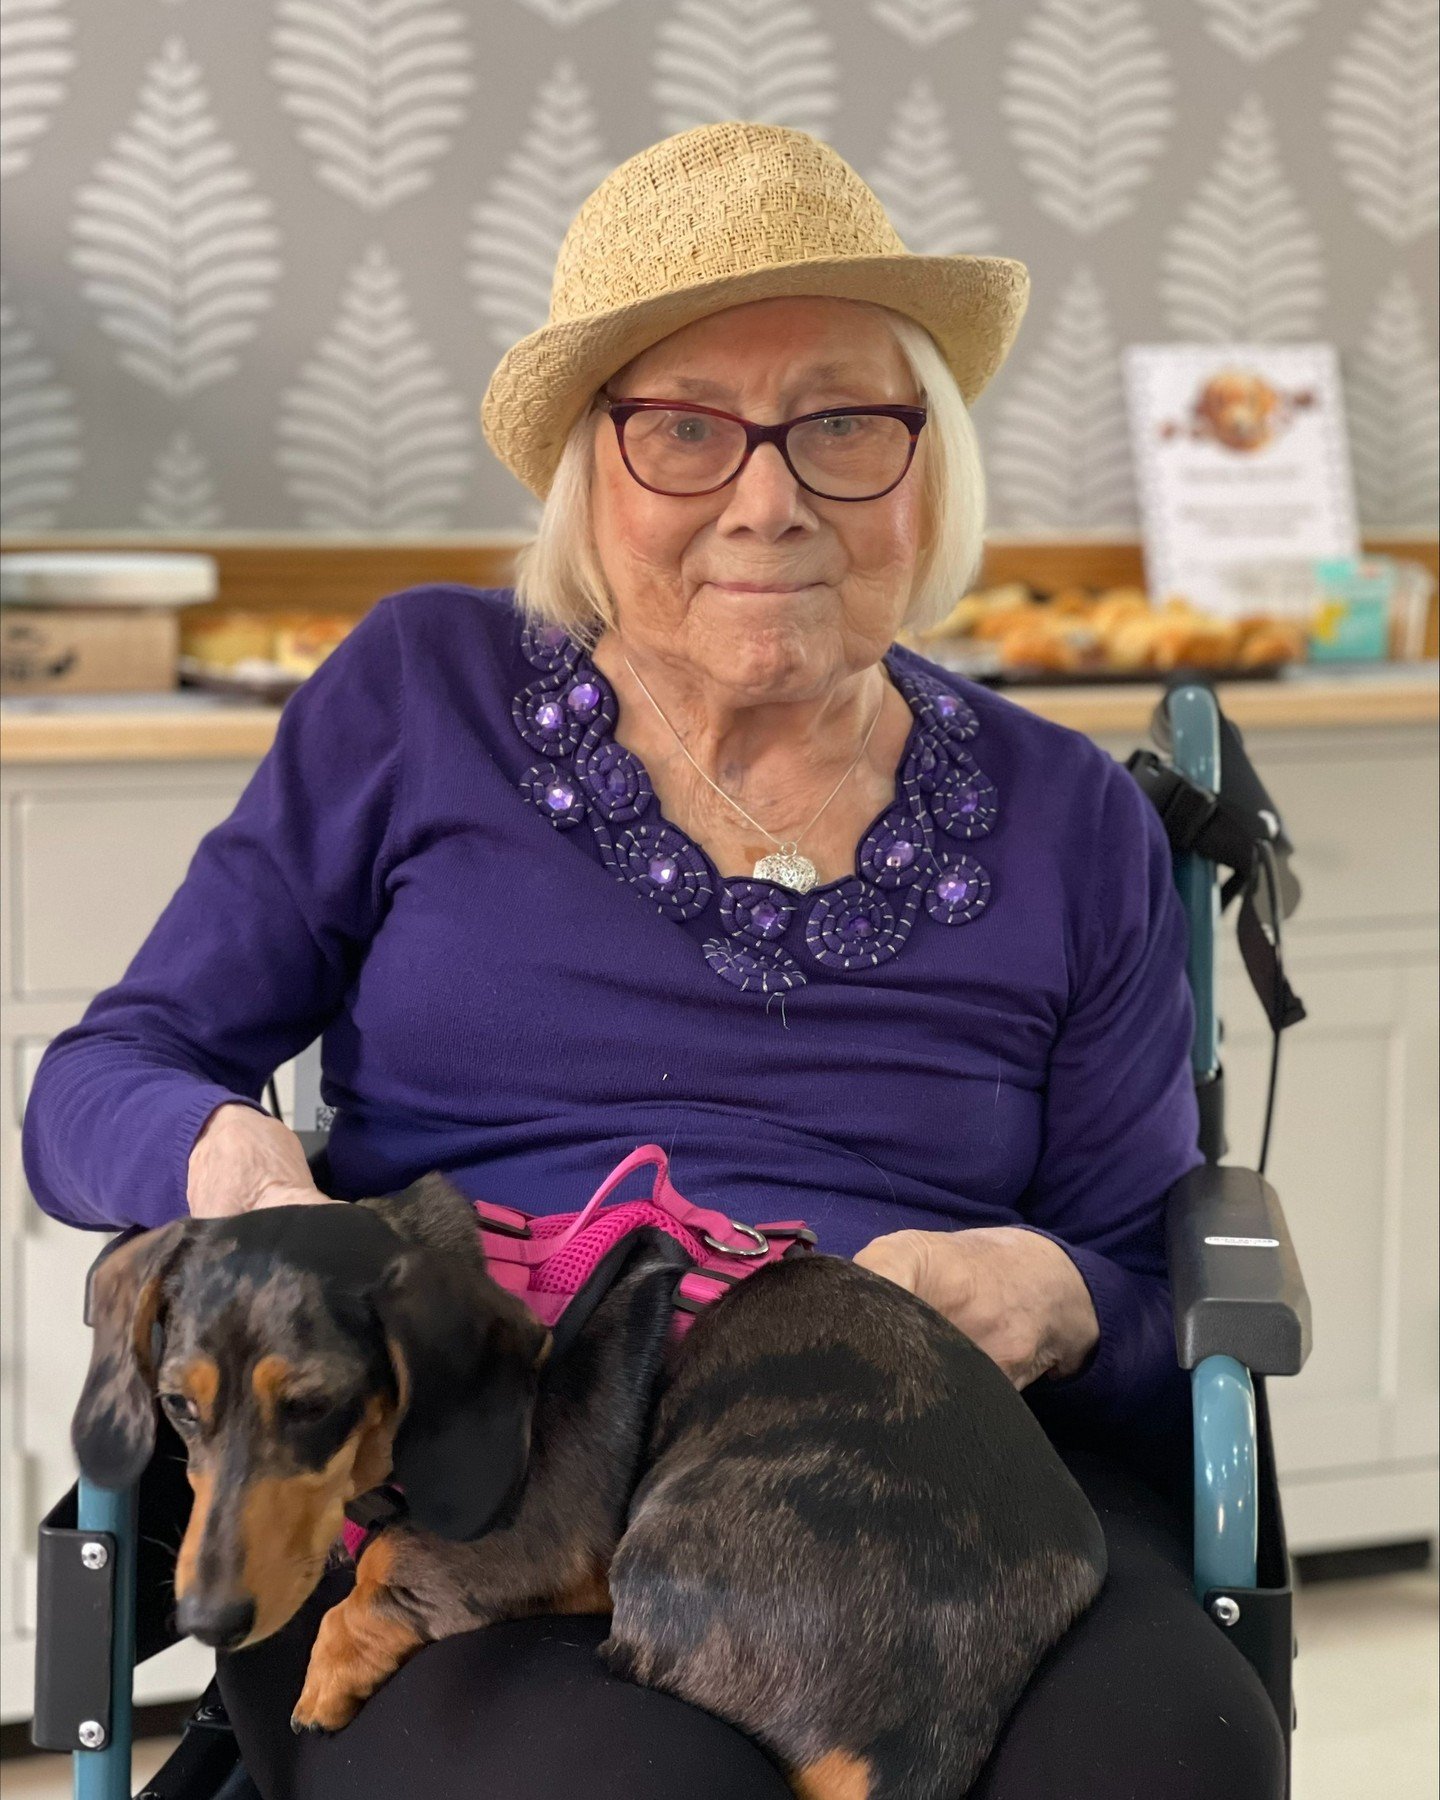 Excelcare's Sherrell House Care Home in Chigwell recently hosted its first Canine Coffee Morning, with residents, their families, and members of the local Chigwell community, plus their furry friends, all invited to join in the fun
See bio for link
#